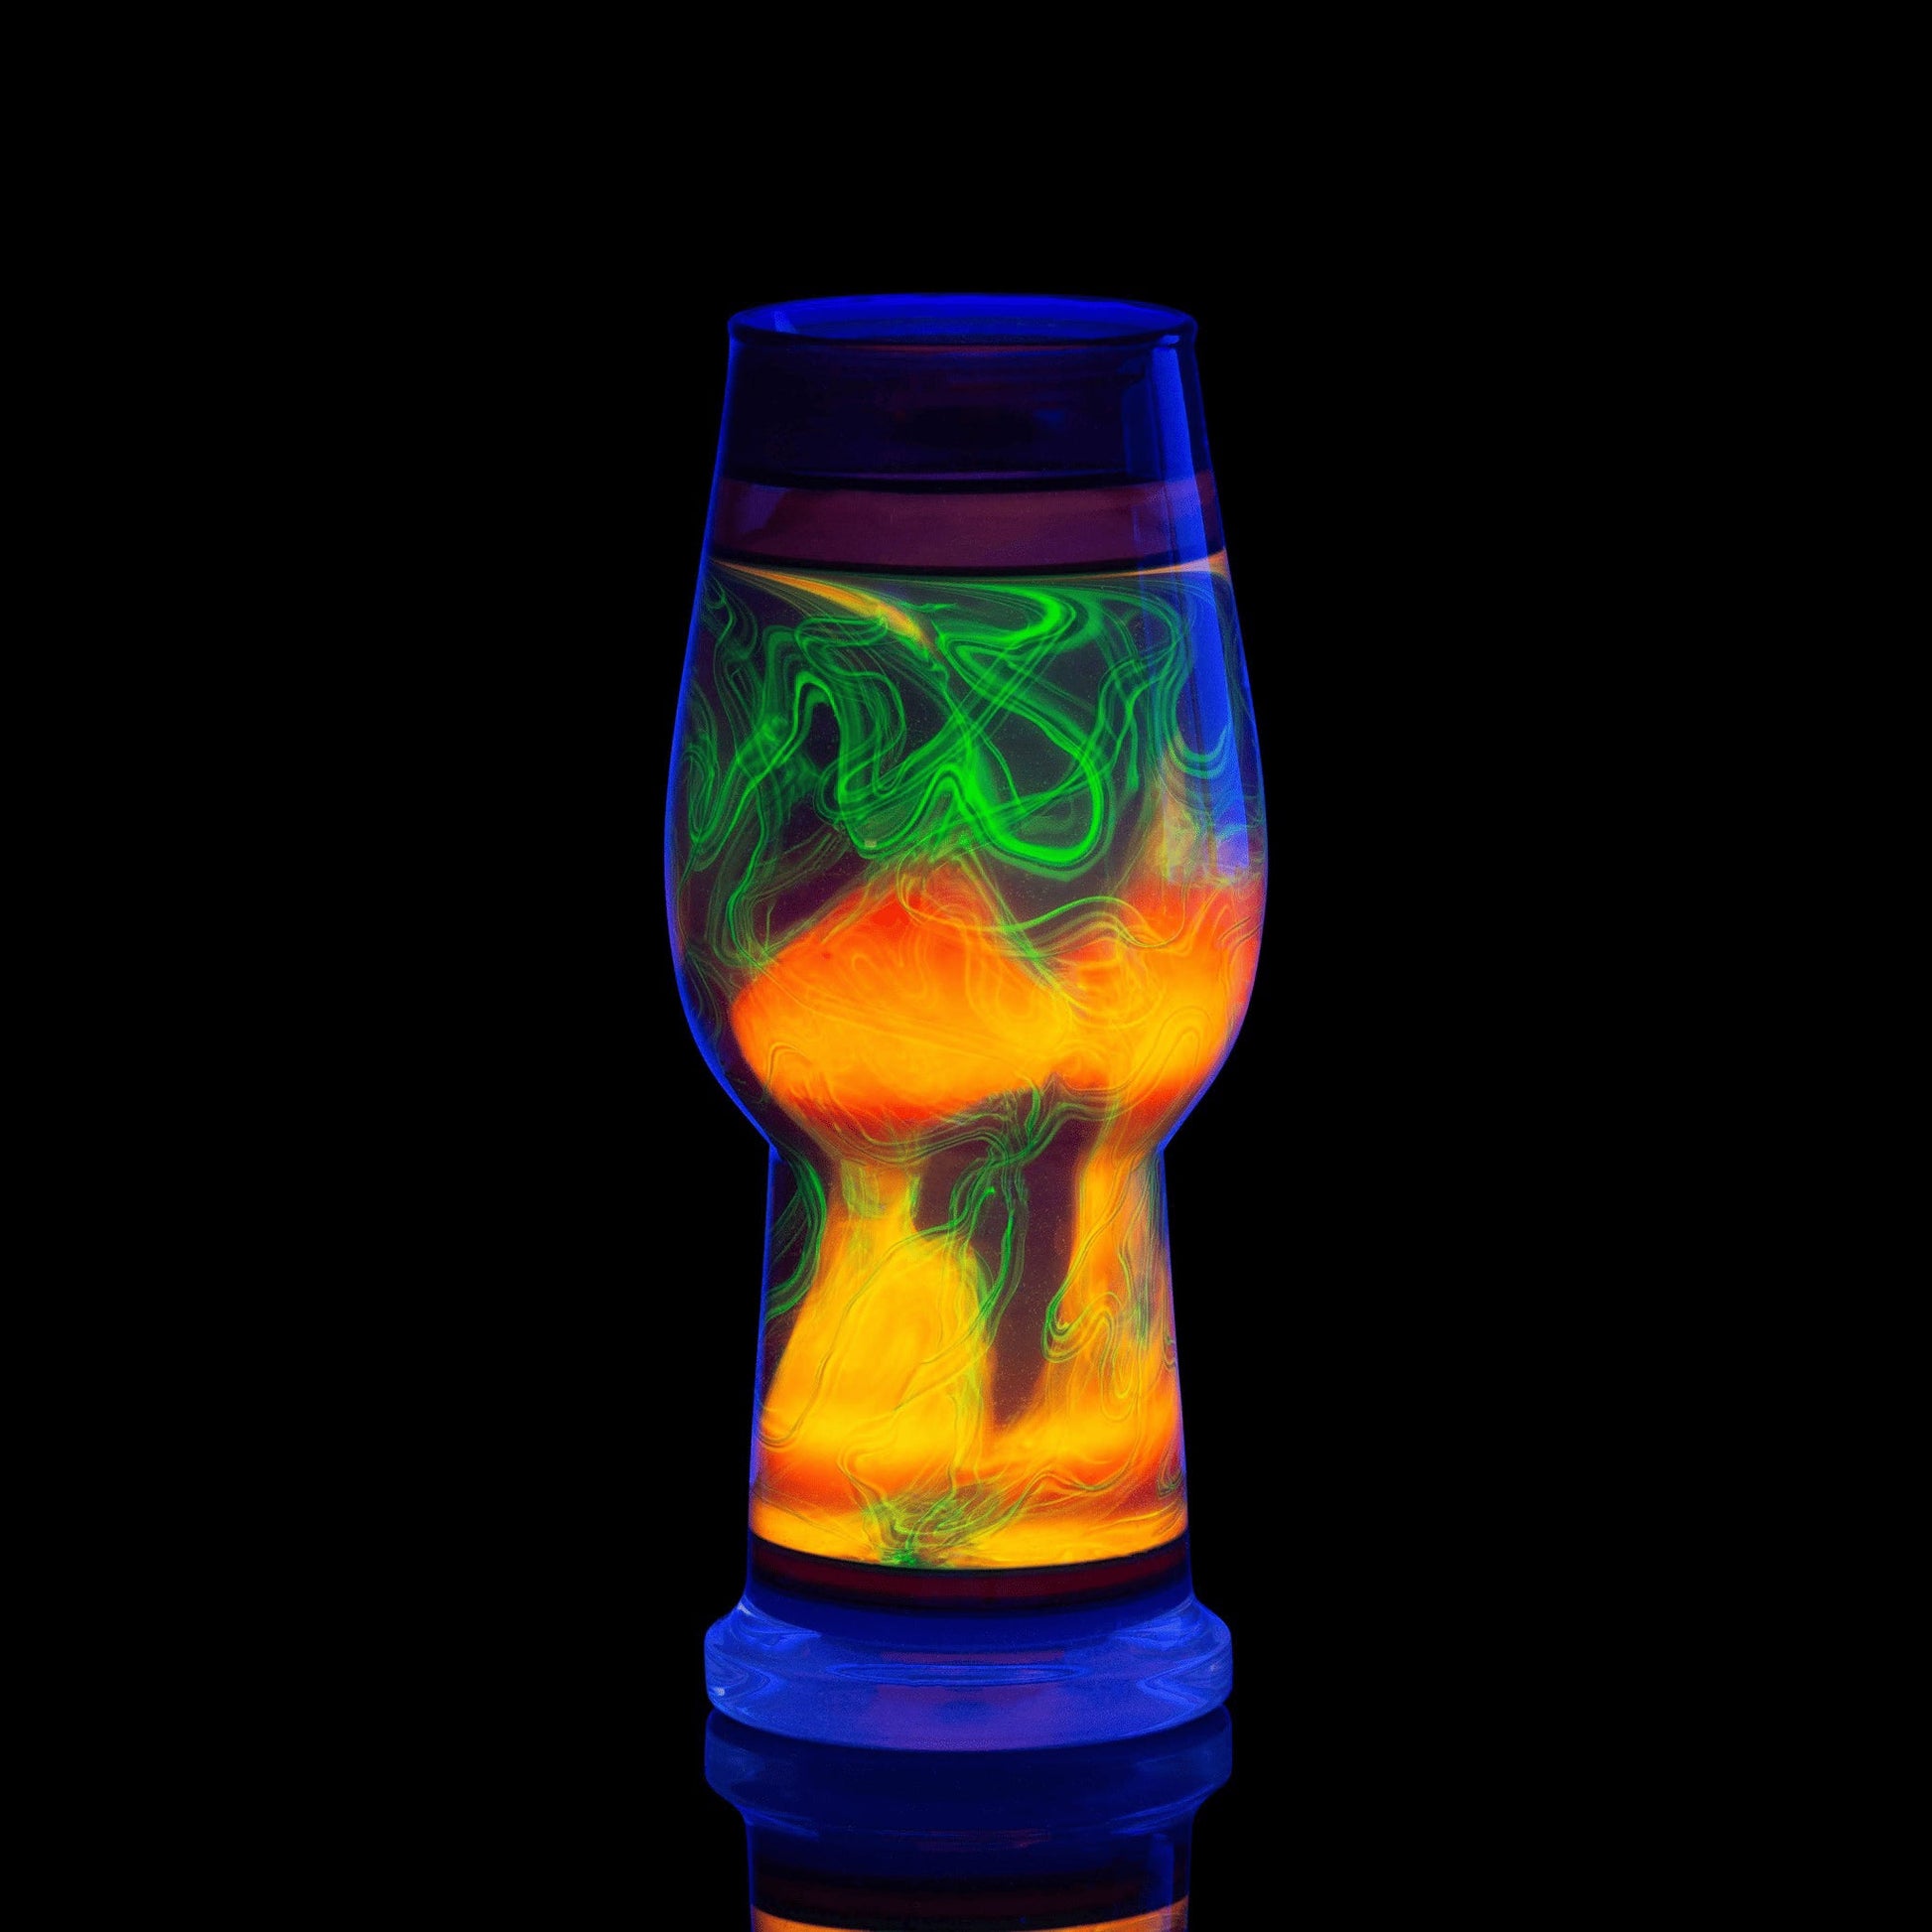 sophisticated art piece - Collab Pilsner Cup by Stephan Peirce x Scomo Moanet (Scribble Season 2022)